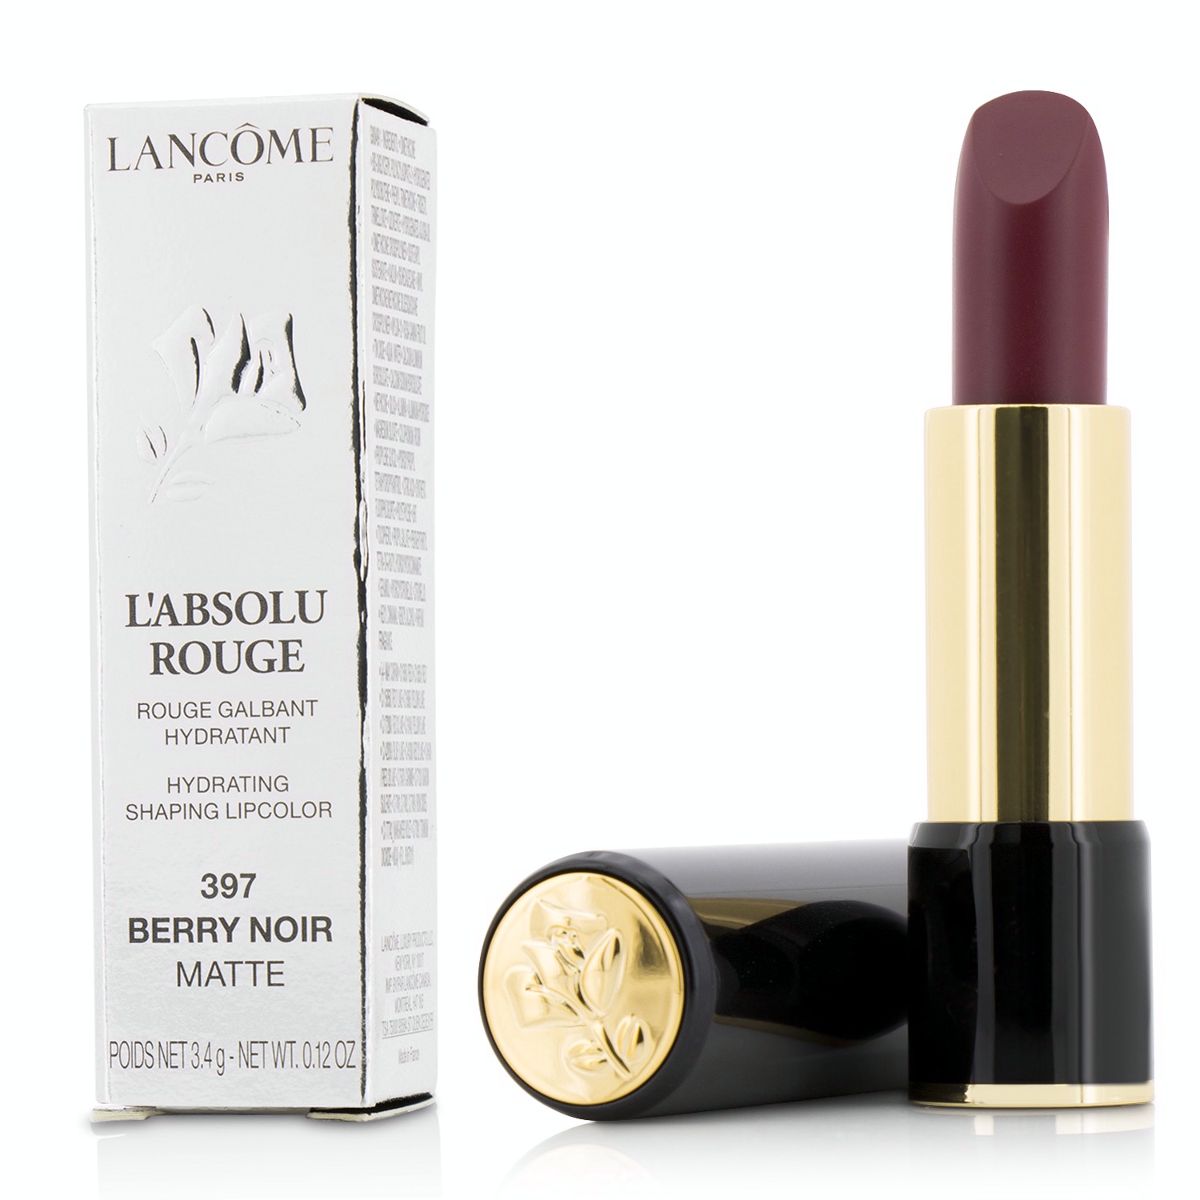 L Absolu Rouge Hydrating Shaping Lipcolor - # 397 Berry Noir (Matte) Lancome Image